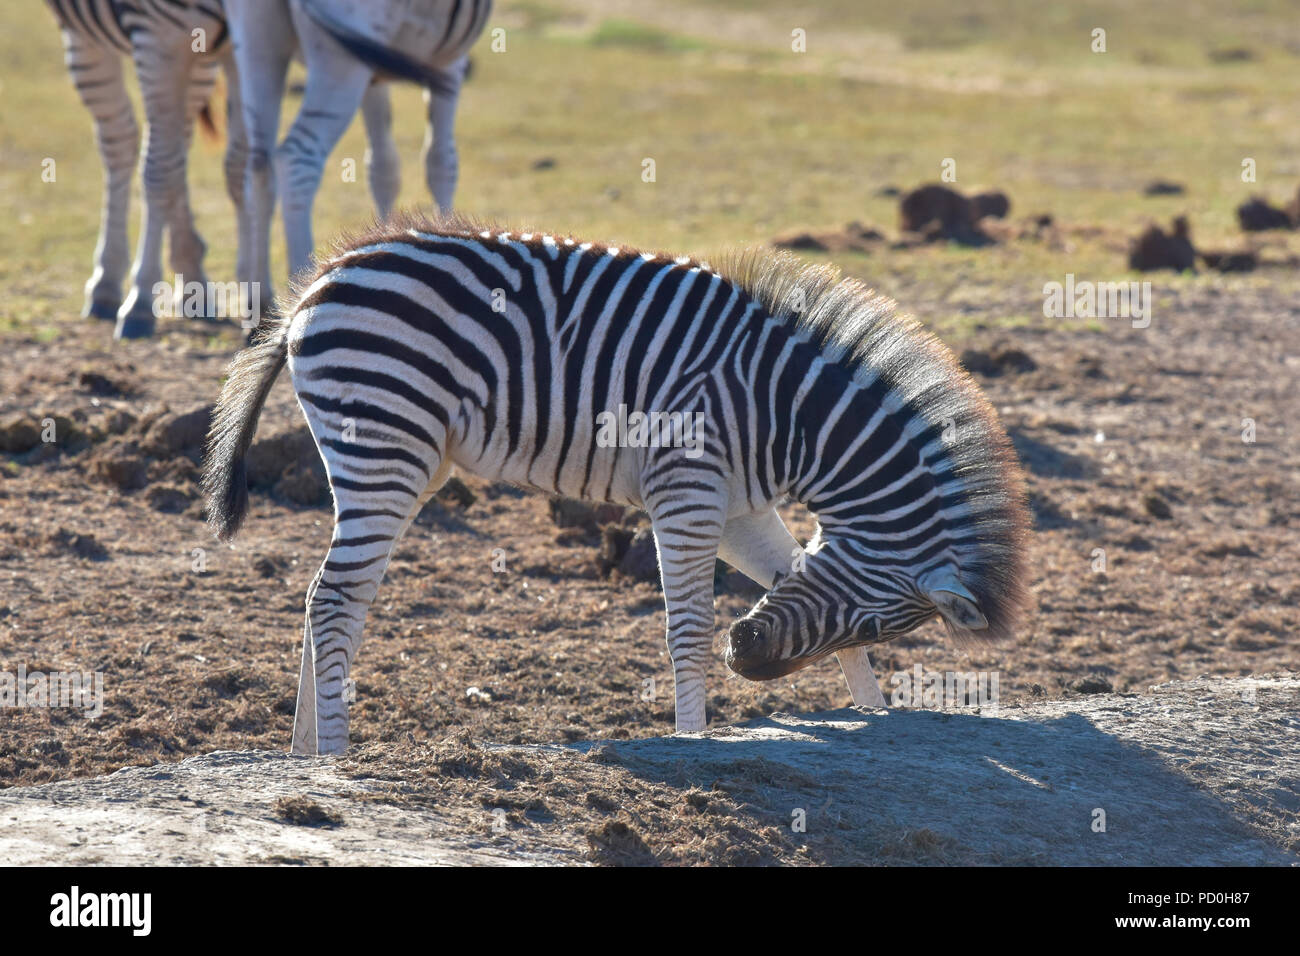 South Africa, a fantastic travel destination to experience third and first world together. Zebra foal with backlit mane, Addo Elephant park. Stock Photo